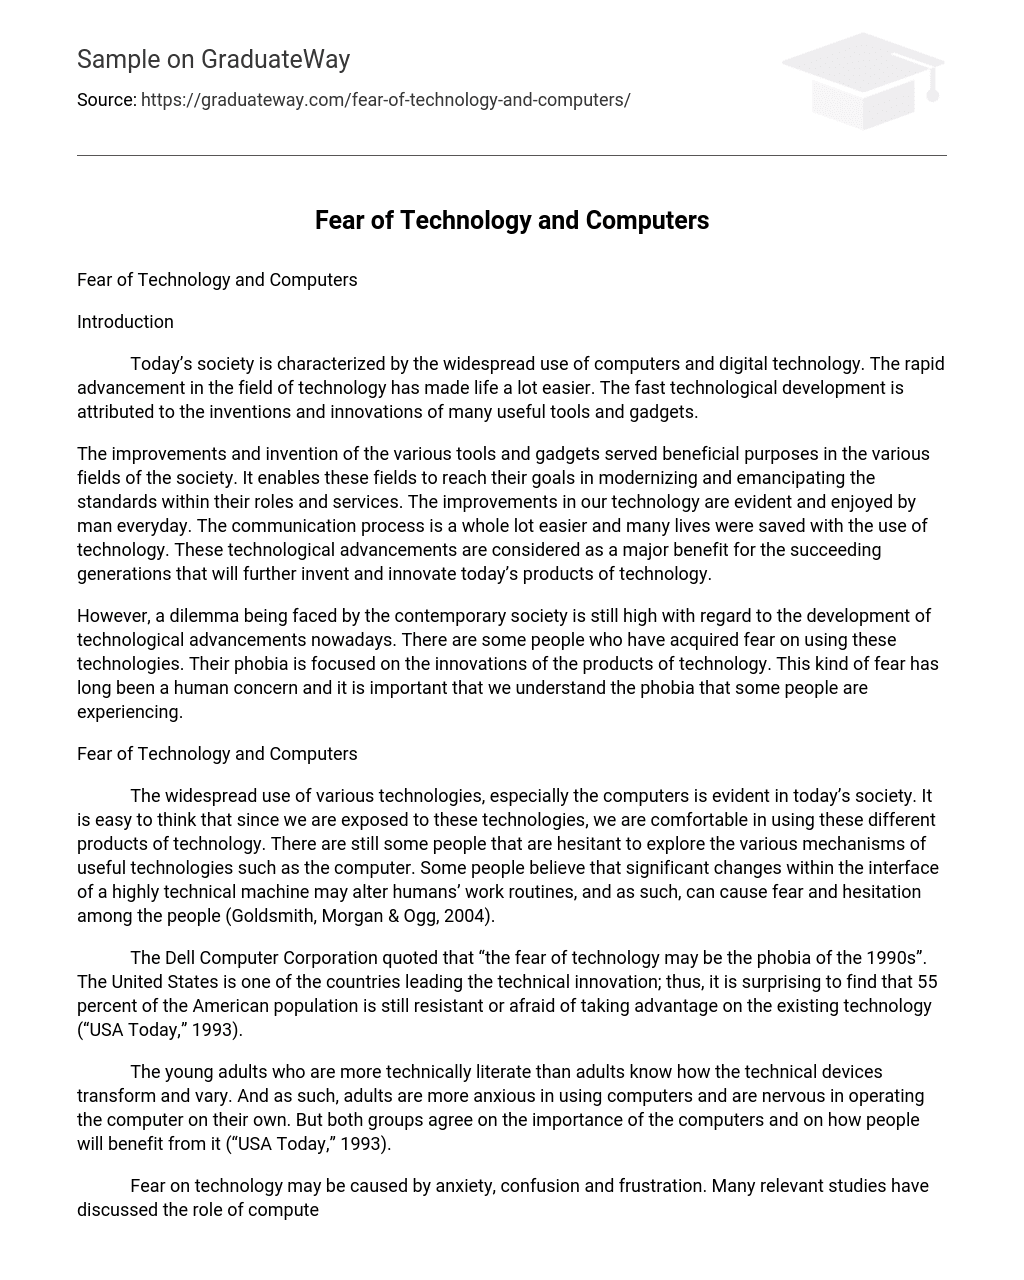 Fear of Technology and Computers